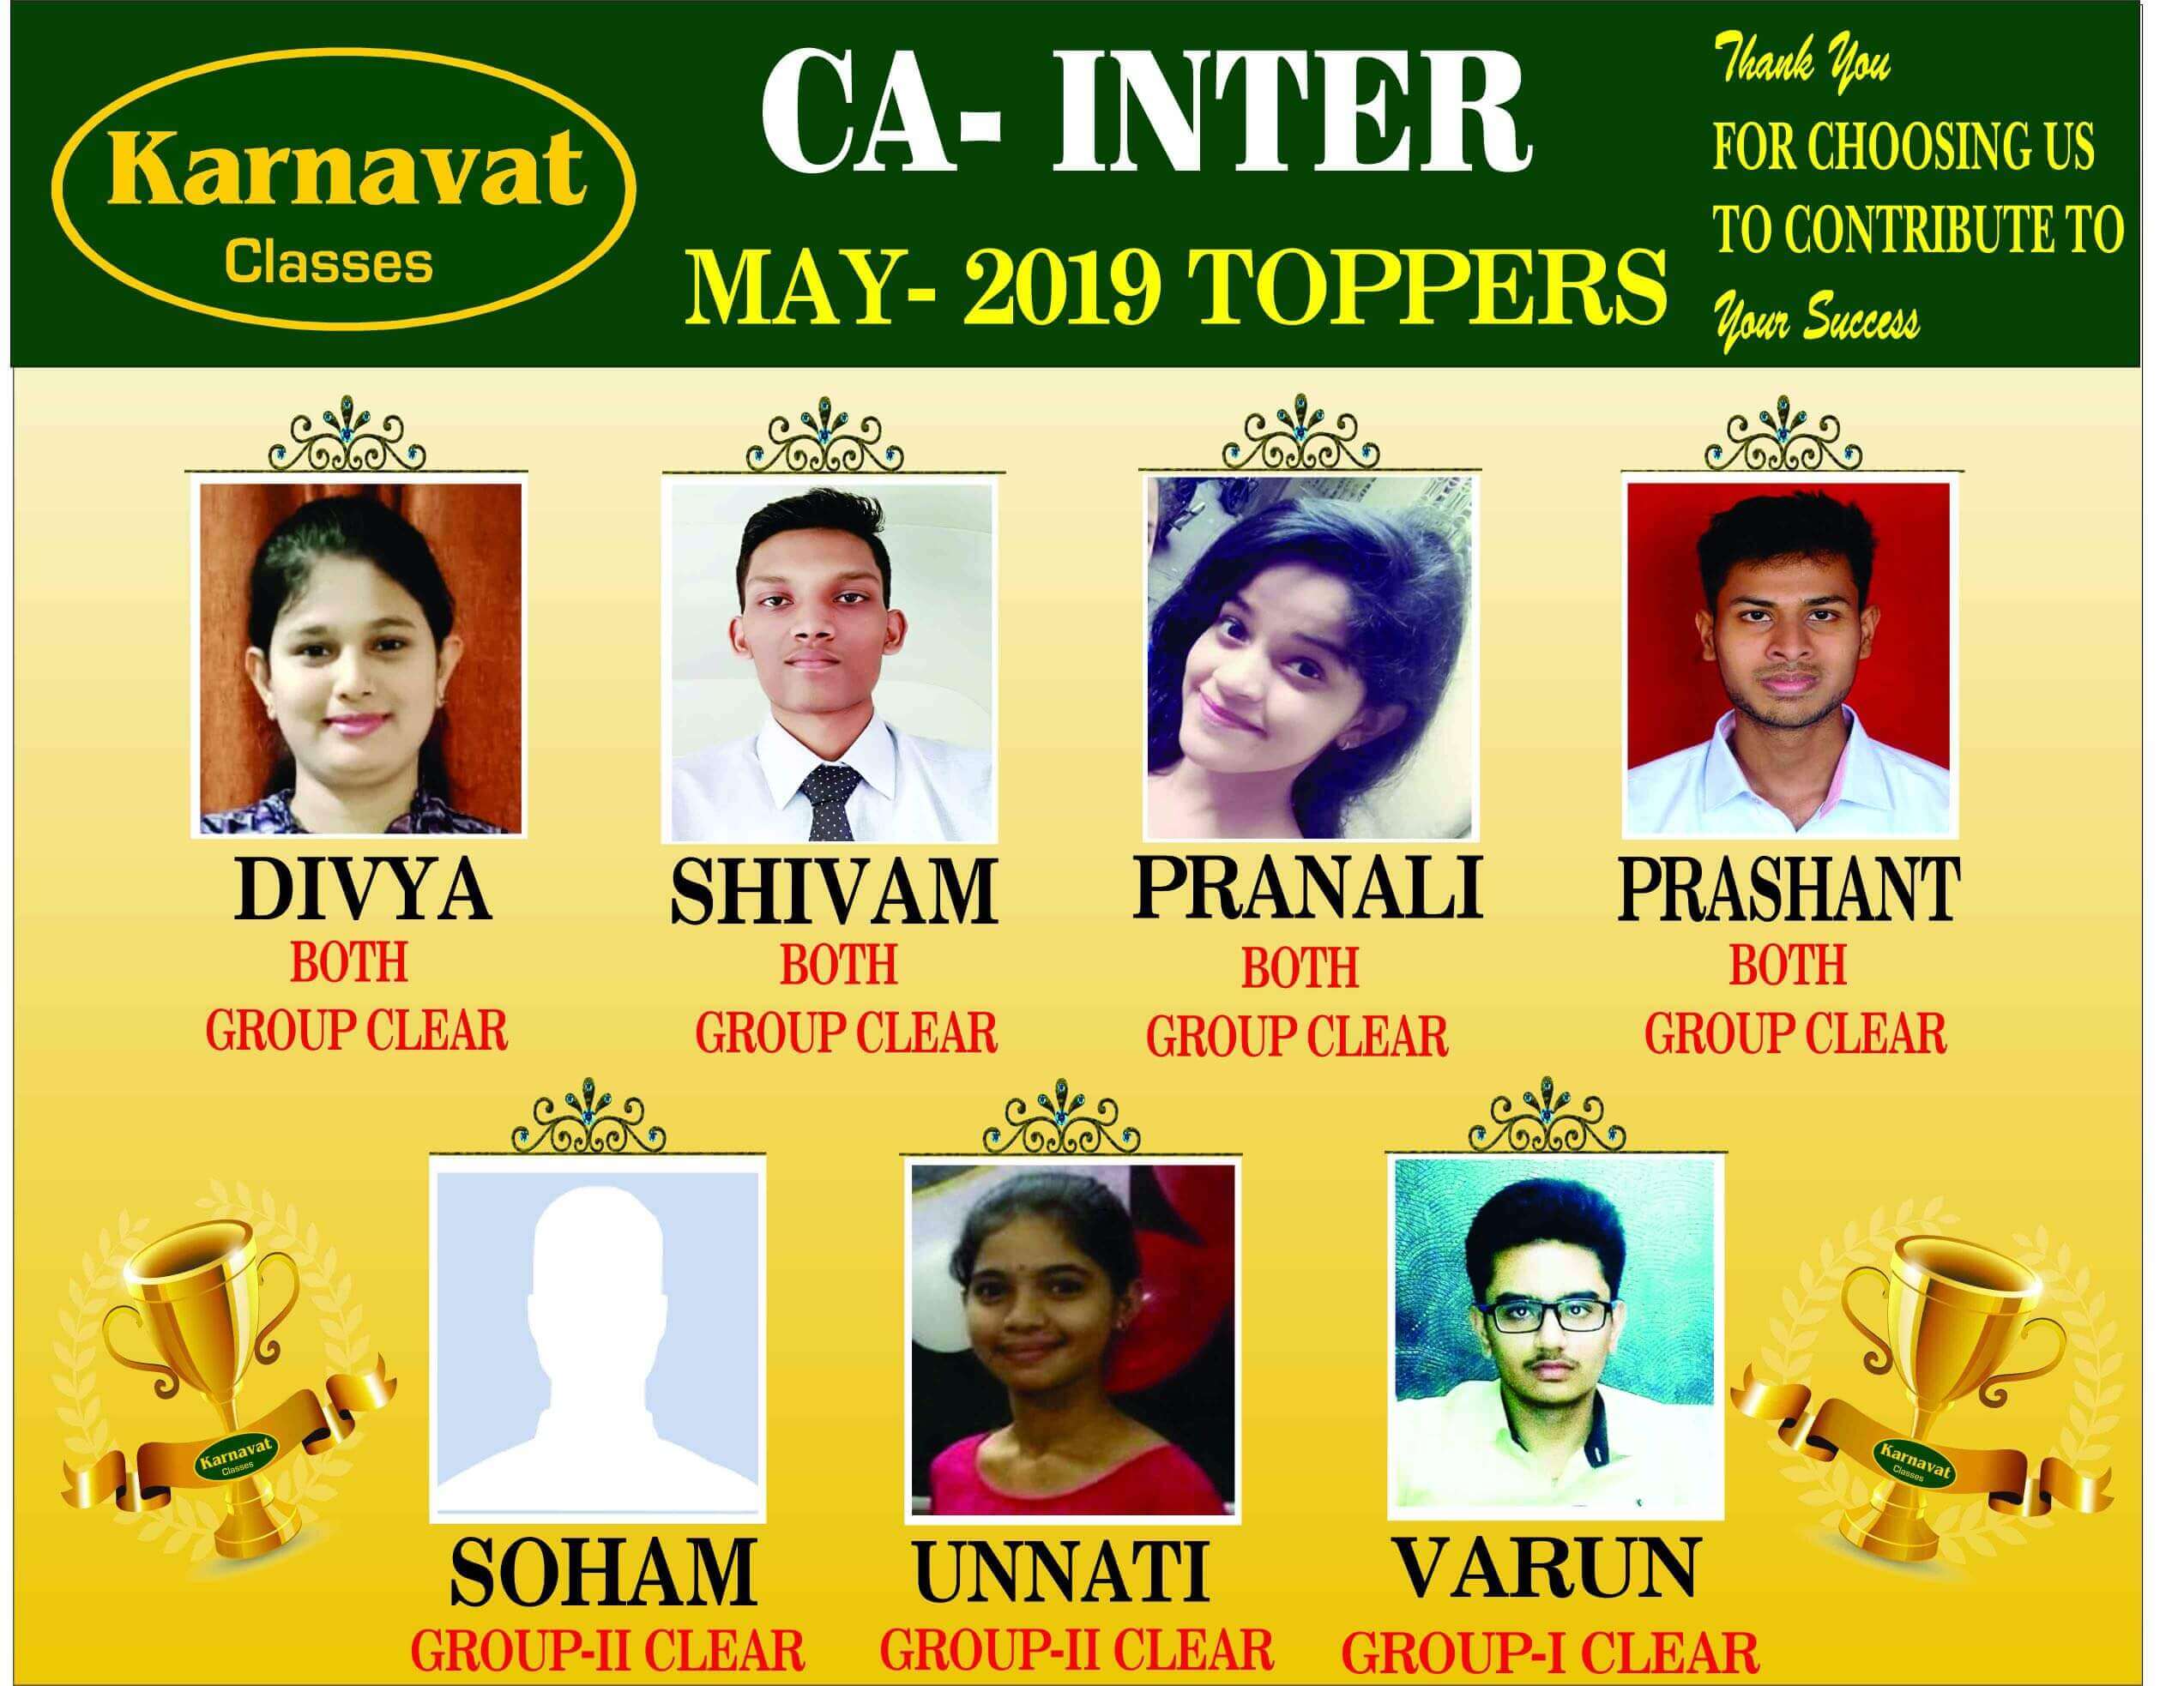 OUR CS-INTER TOPPERS